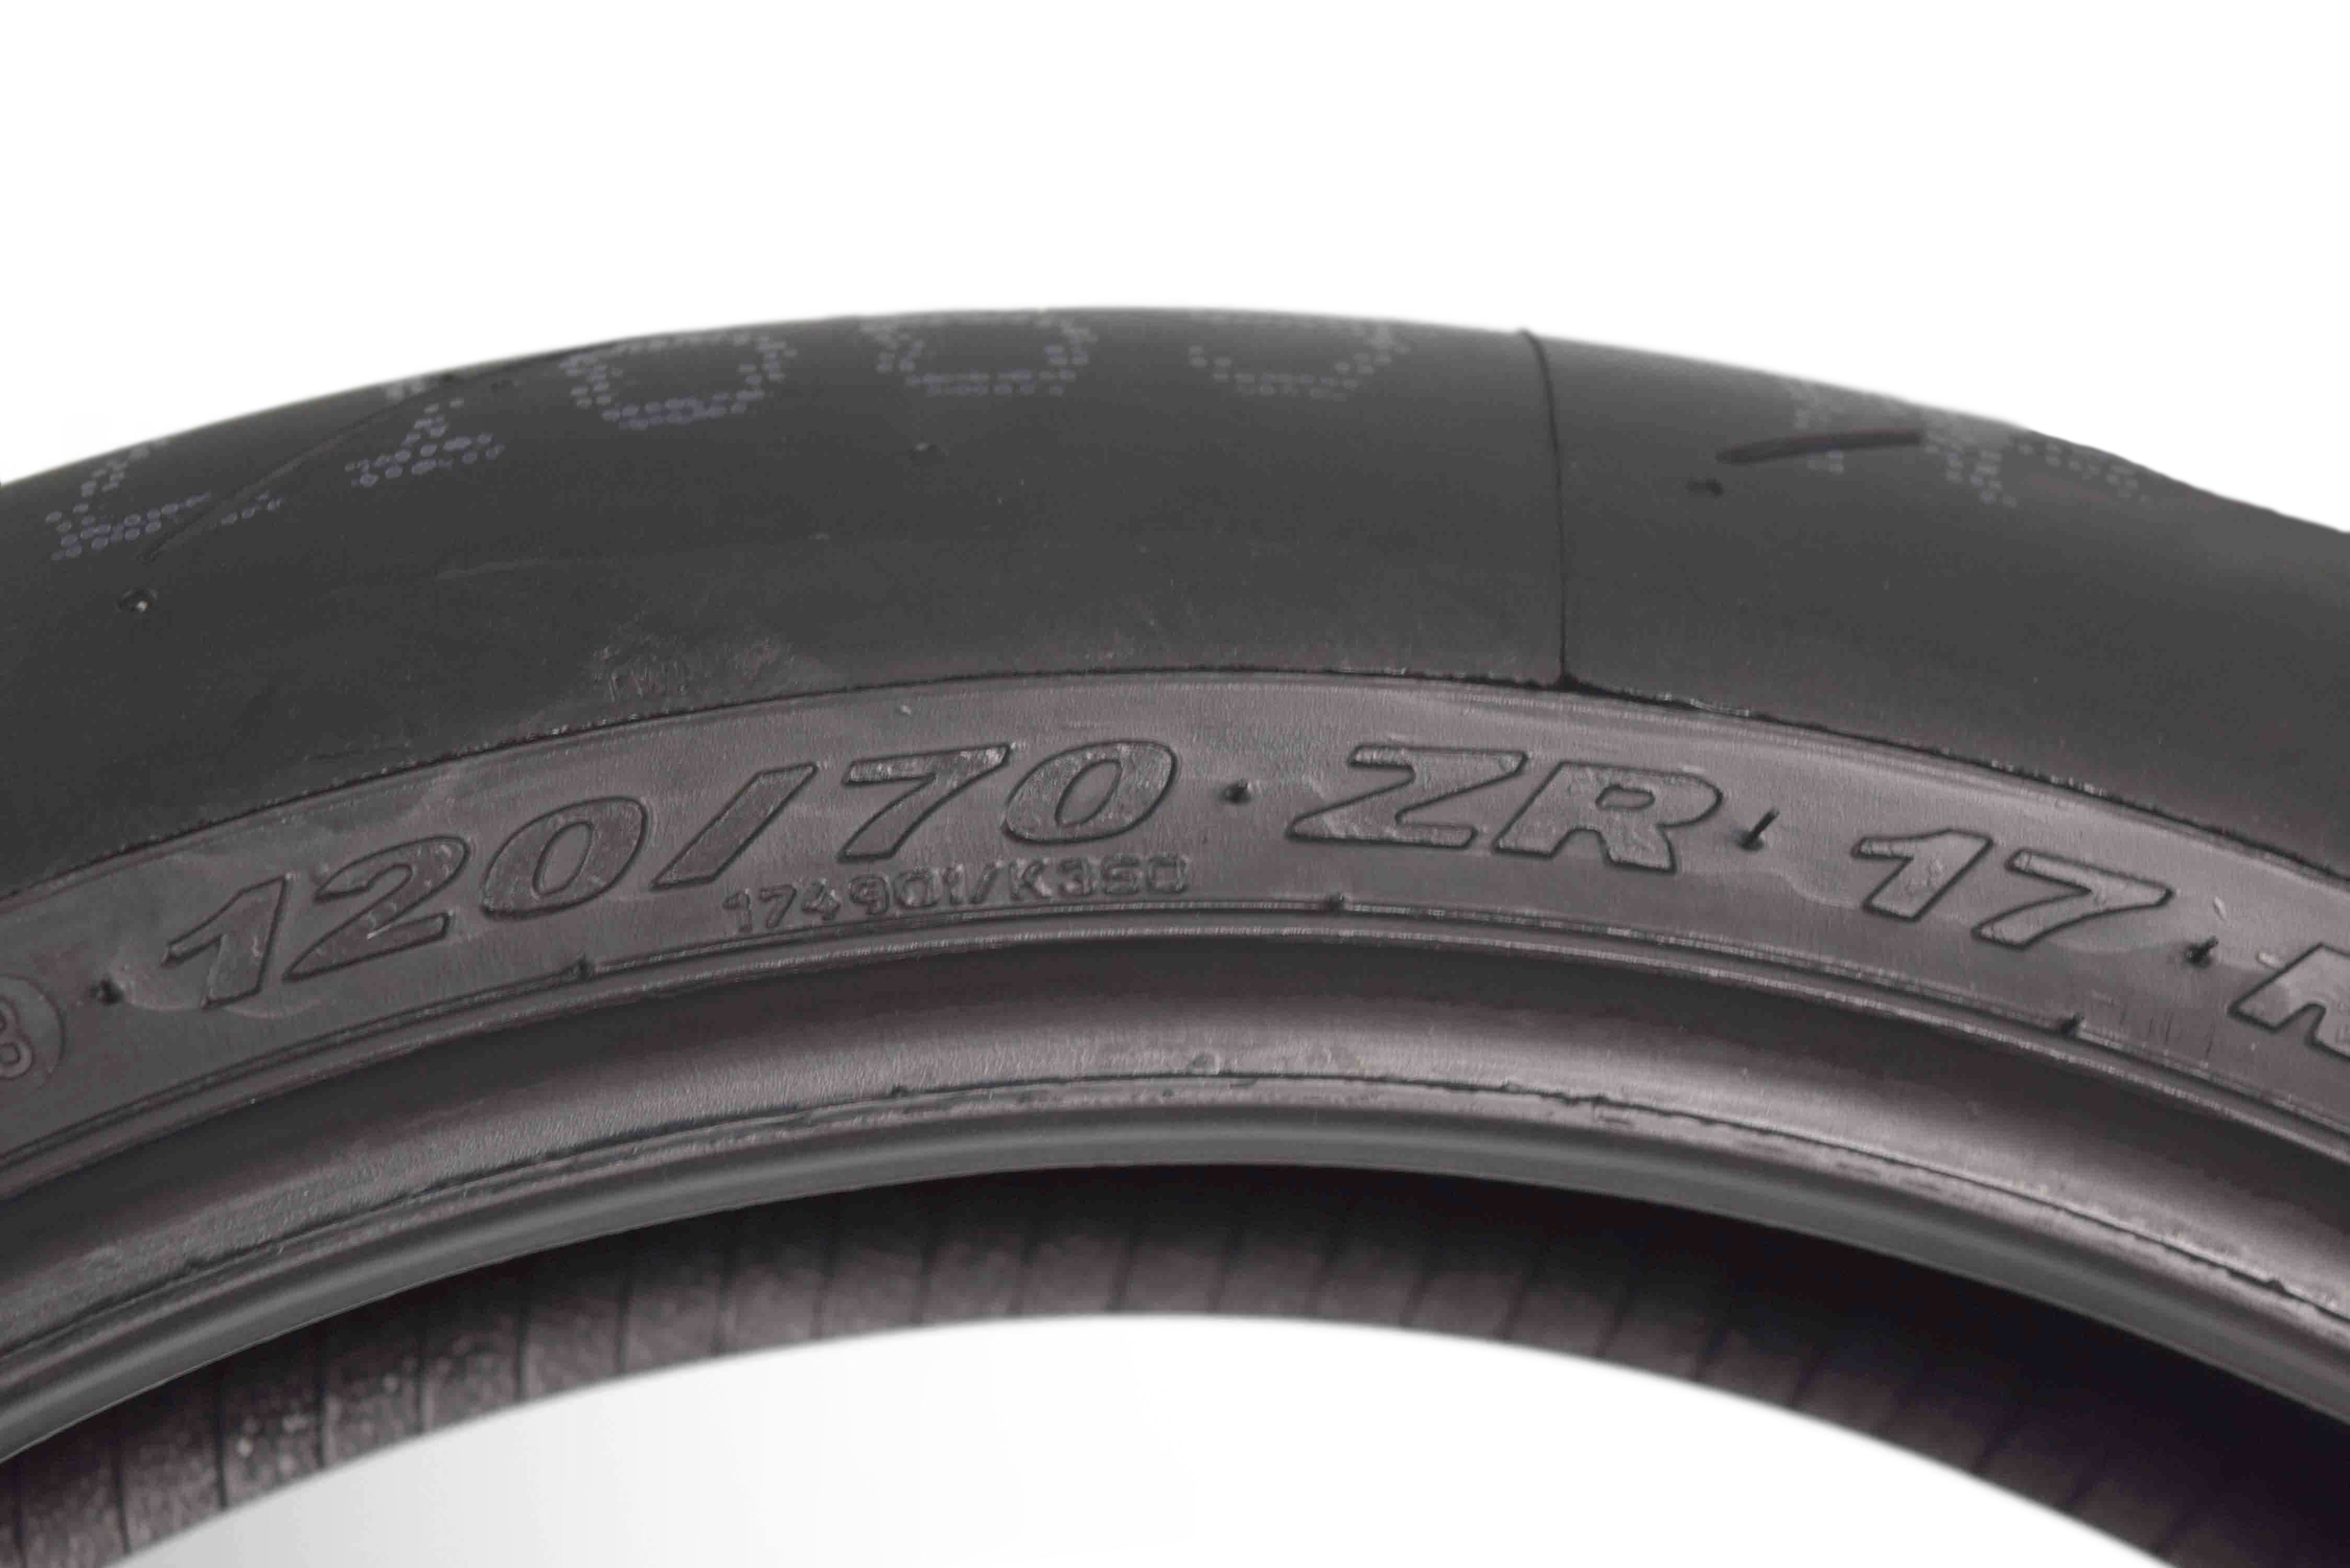 Pirelli-Tire-120-70ZR17-SUPER-CORSA-V2-Radial-Motorcycle-Front-Tire-120-70-17-image-6